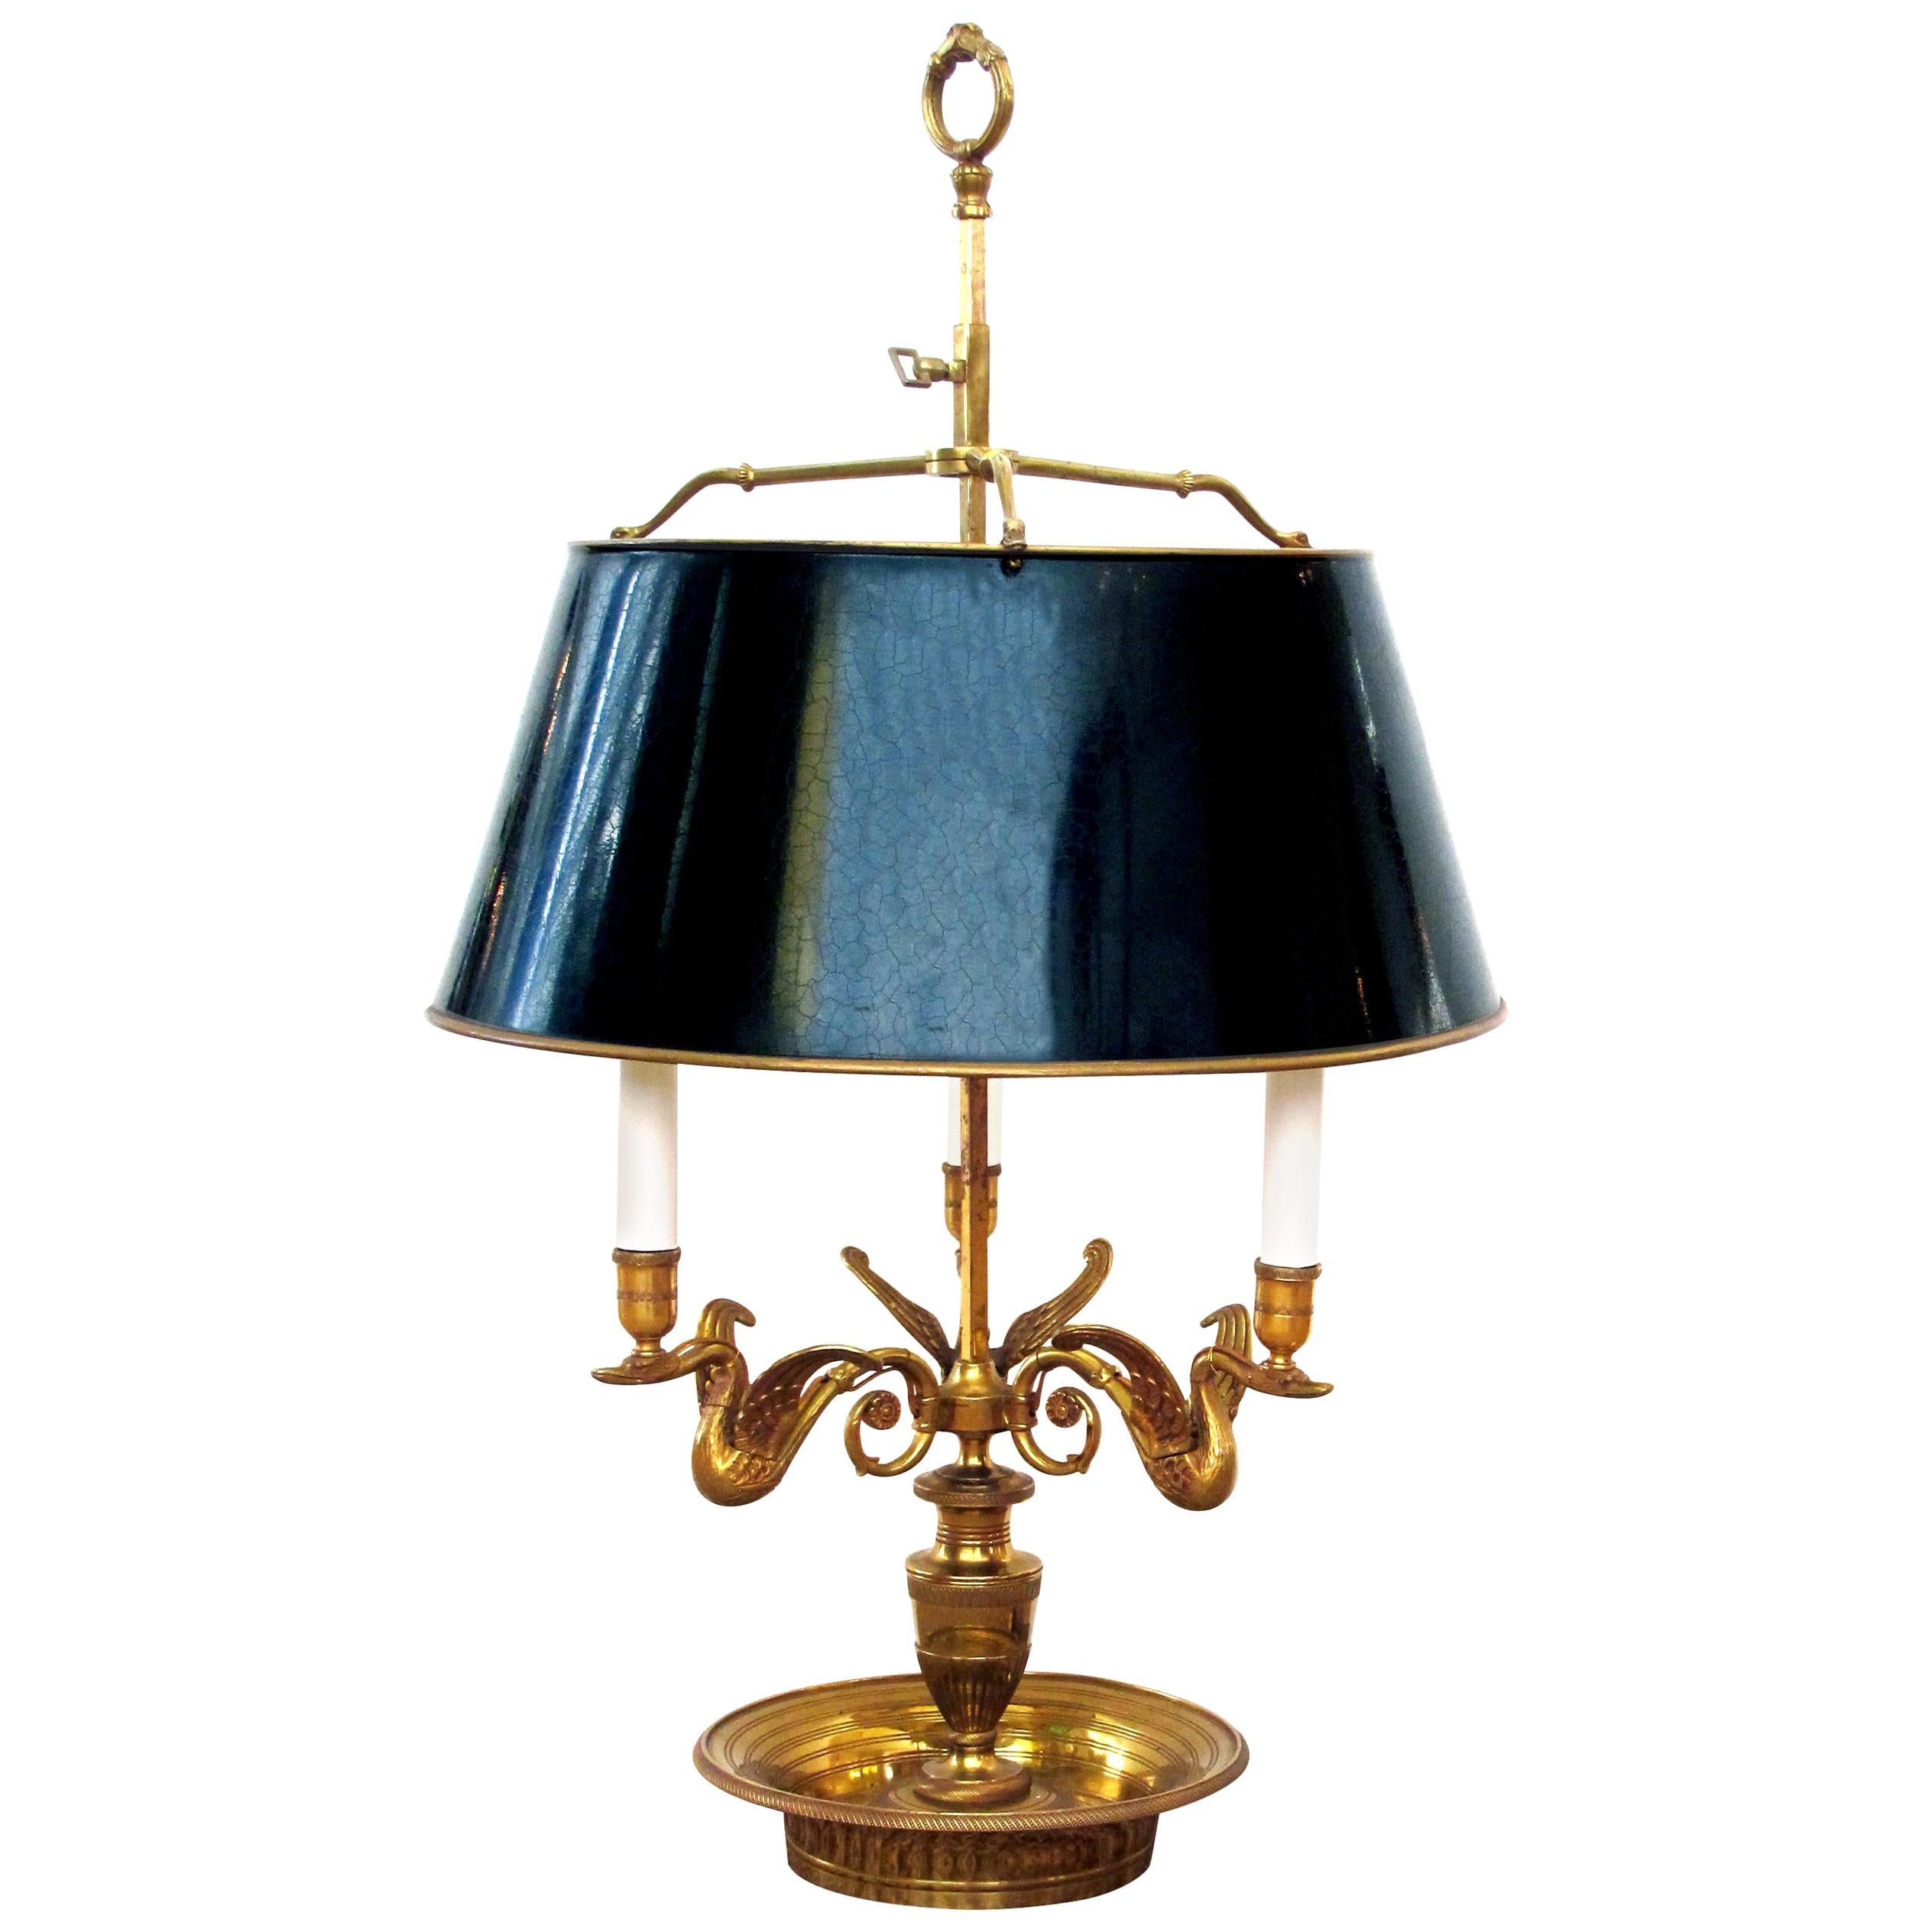 Large-Scaled French Empire Style Gilt-Bronze 3-Light Bouillotte Lamp